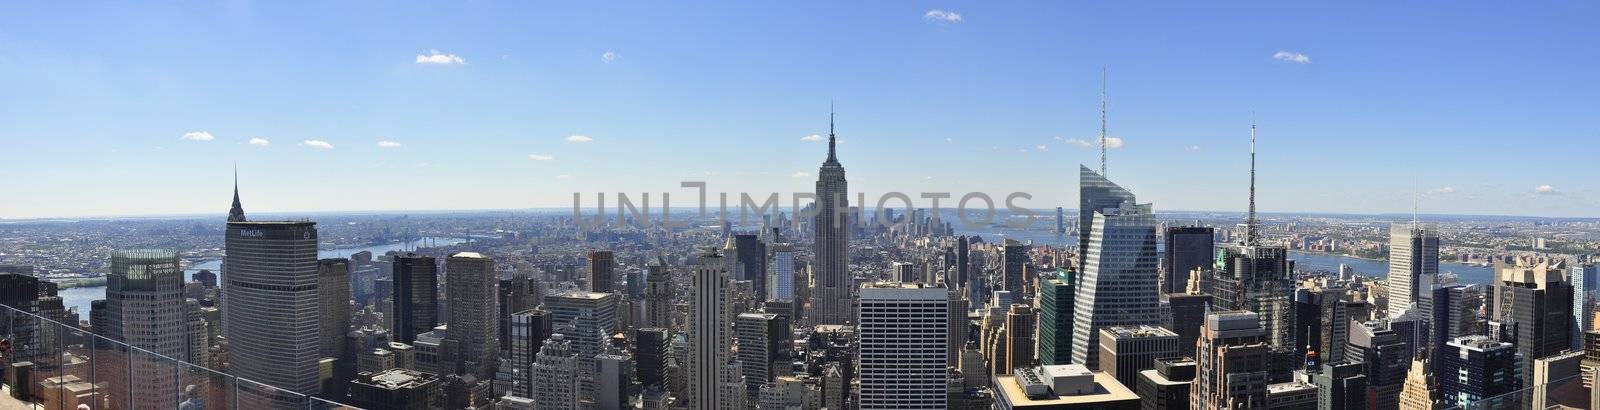 A panorama of New York city shot from the Top of the Rock